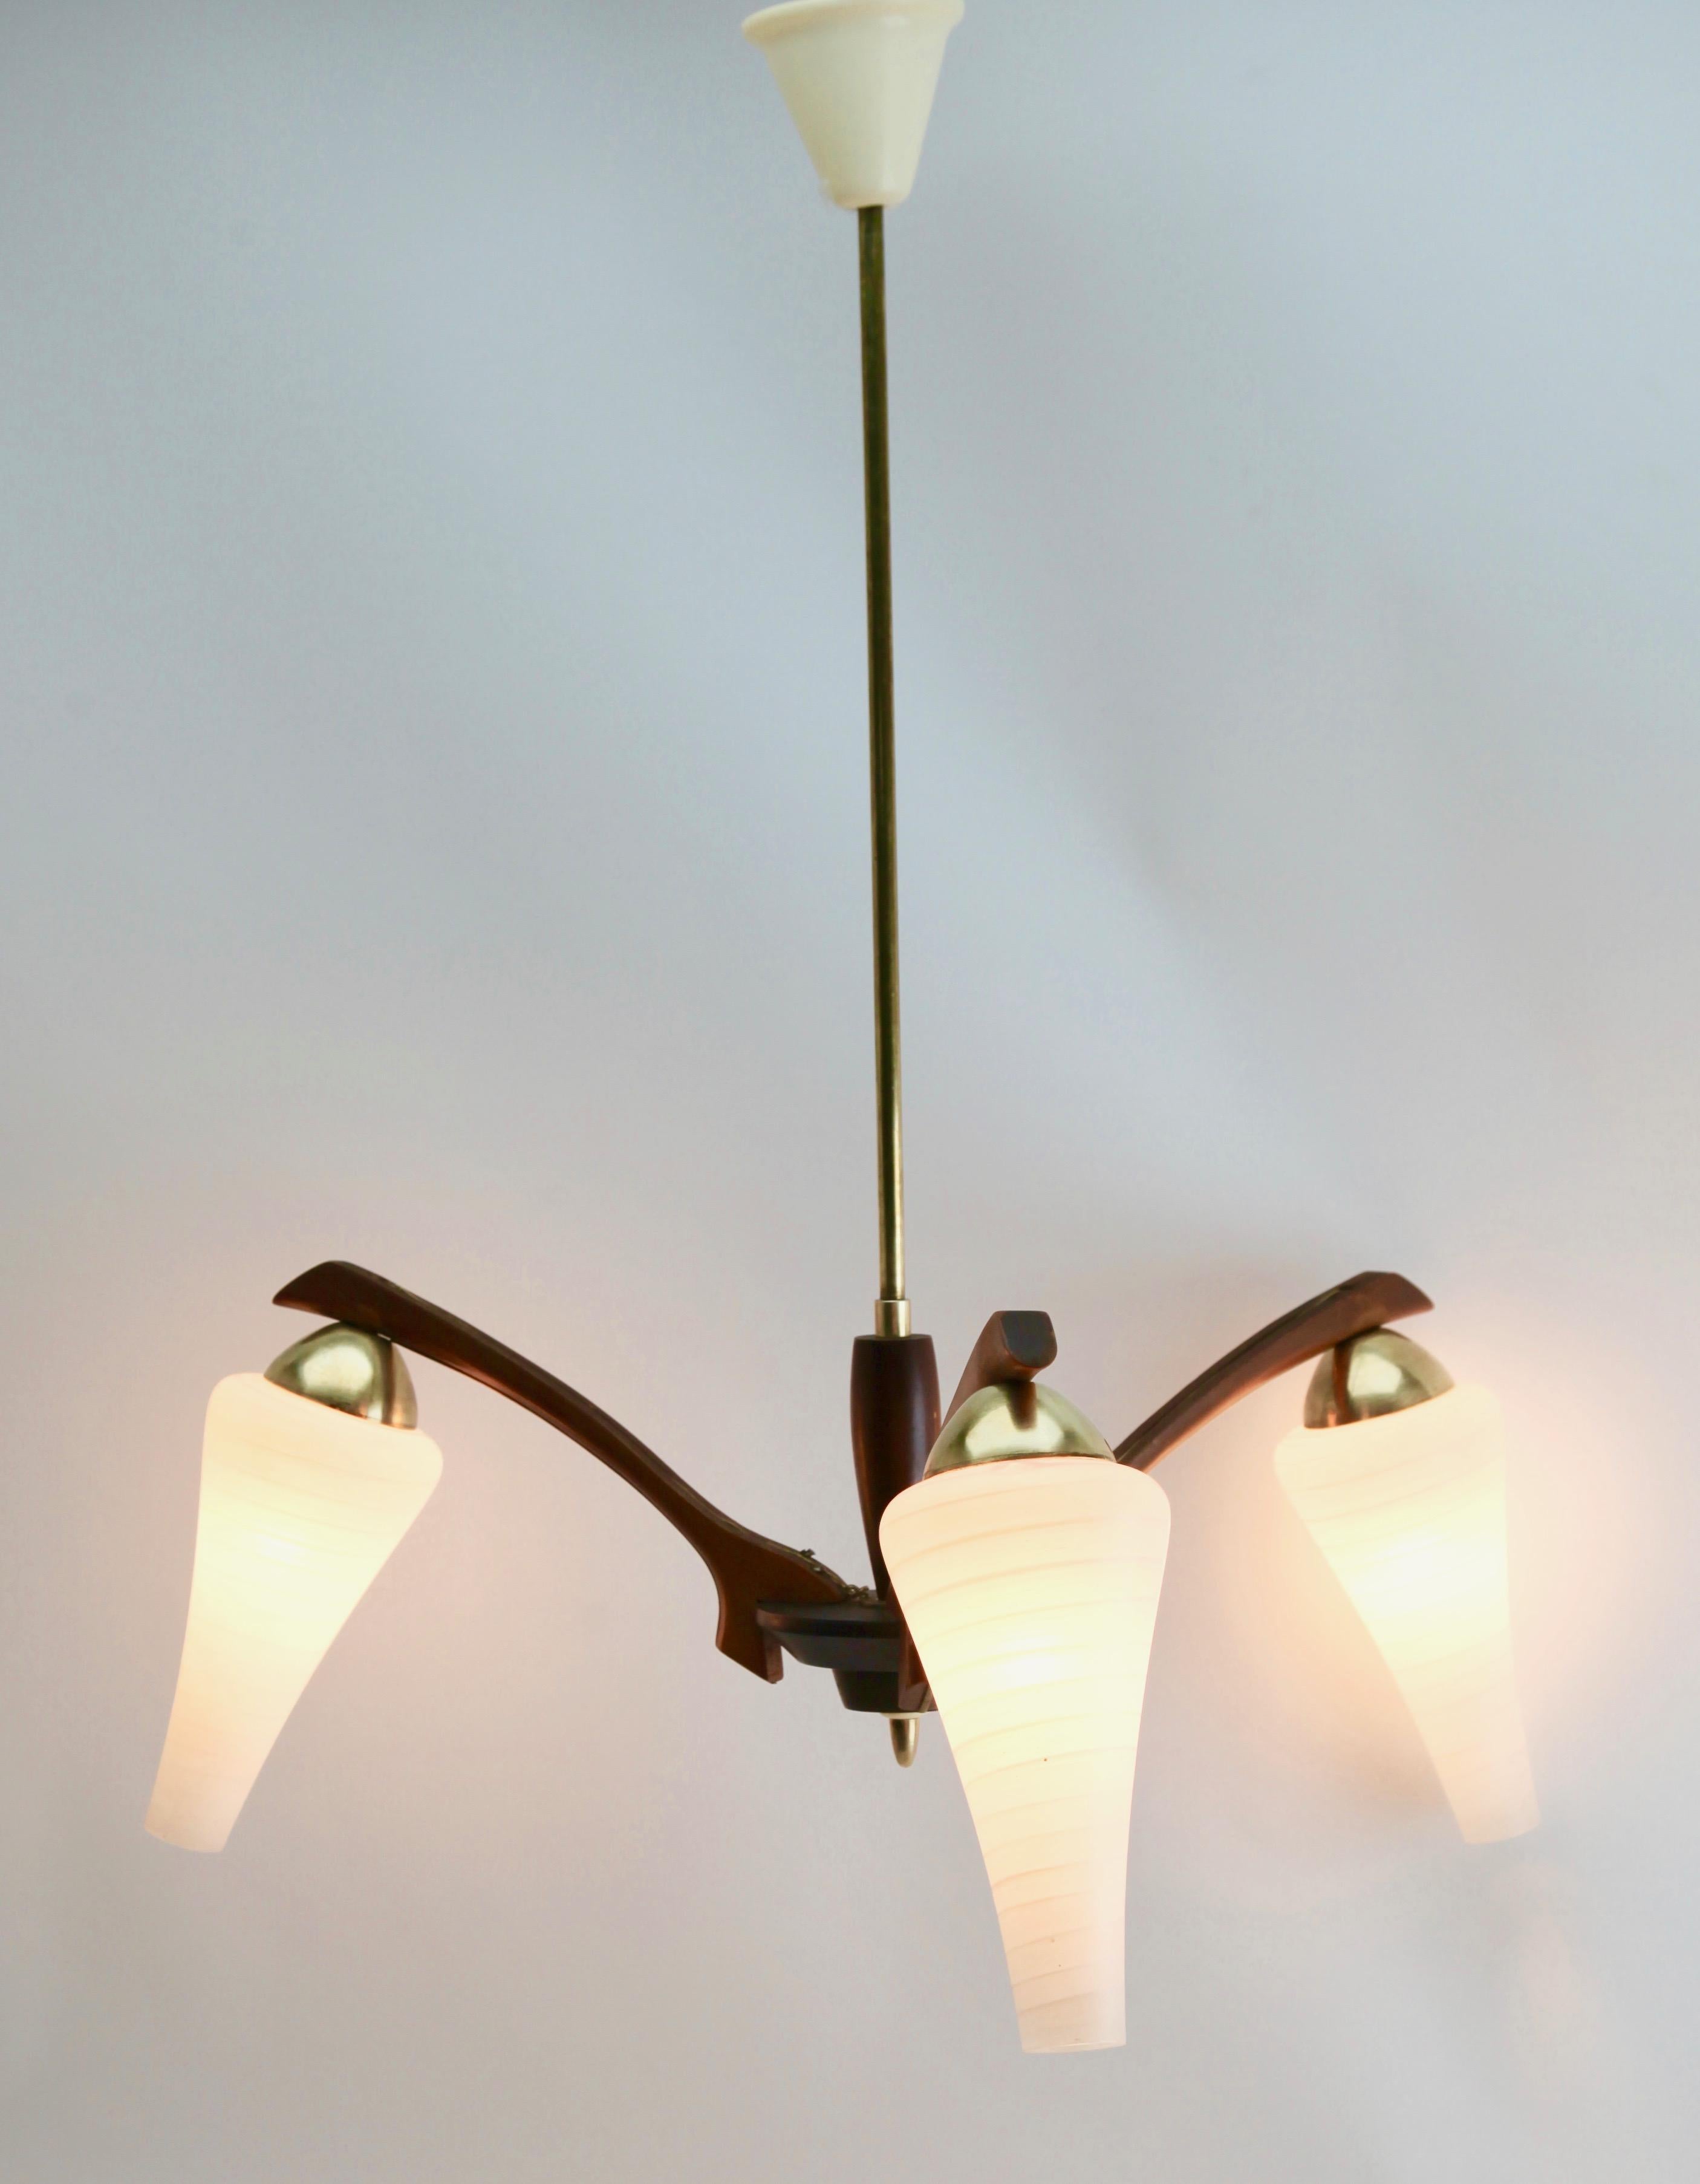 Vintage Chandelier Three Arms in the Style of Stilnovo, Italian, 1960s For Sale 2